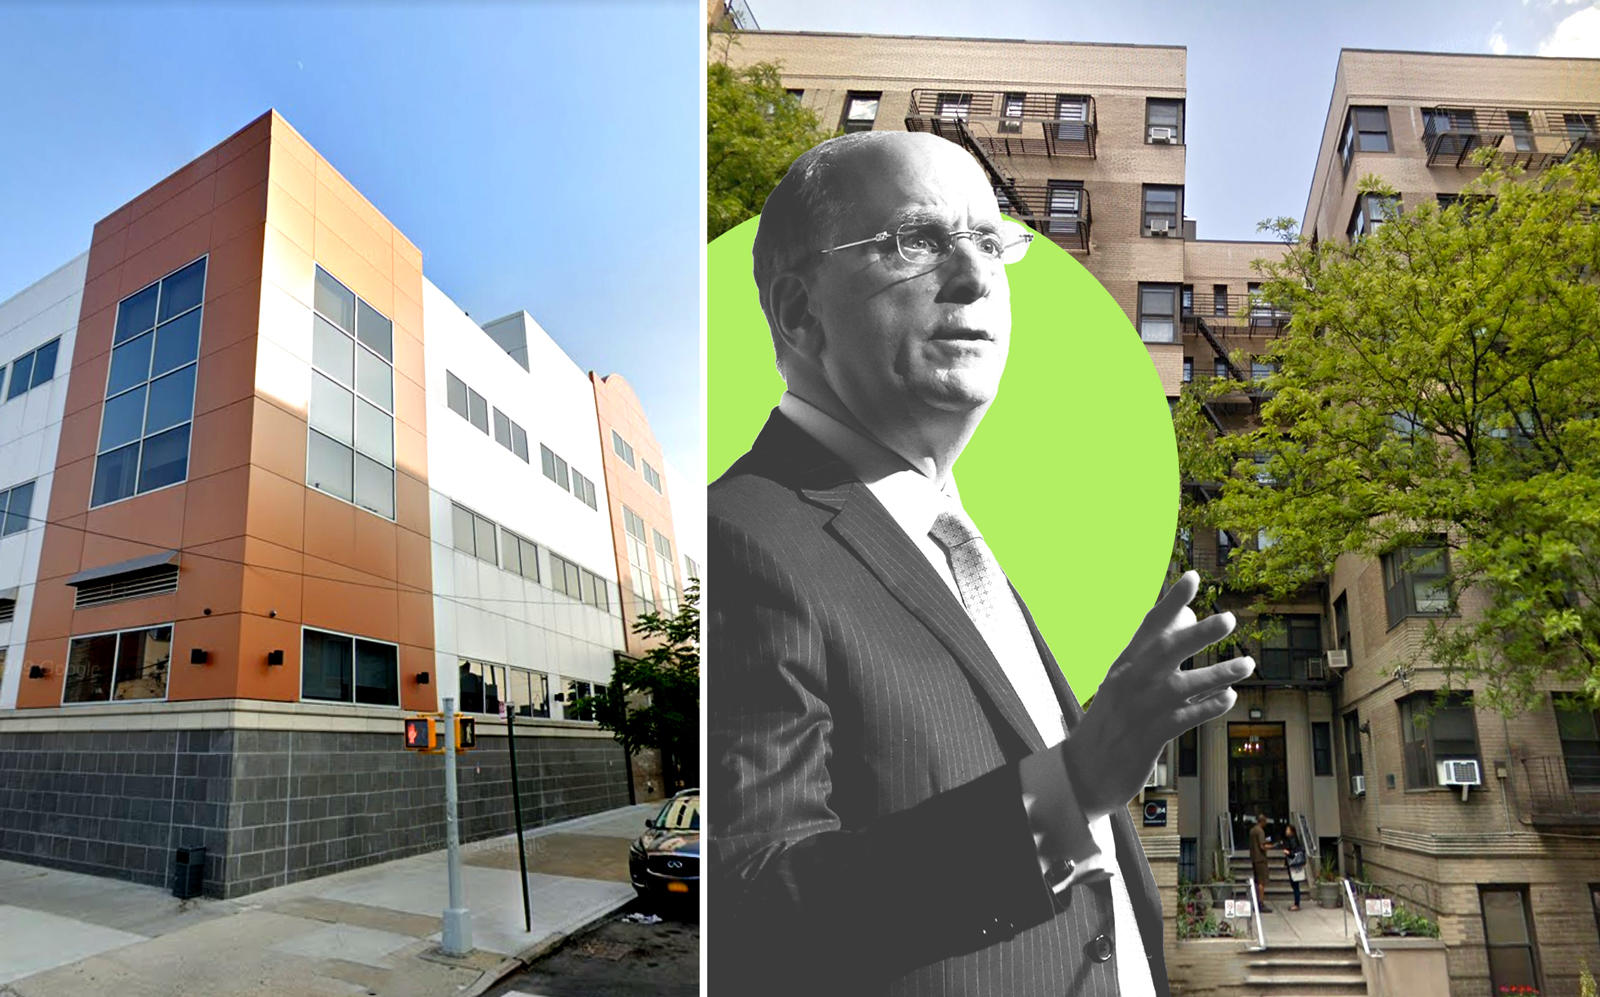 6201 15th Avenue in Bensonhurst and 185 Claremont Avenue with BlackRock CEO Larry Fink (Google Maps; Fink by Eugene Gologursky/Getty Images for IRC)